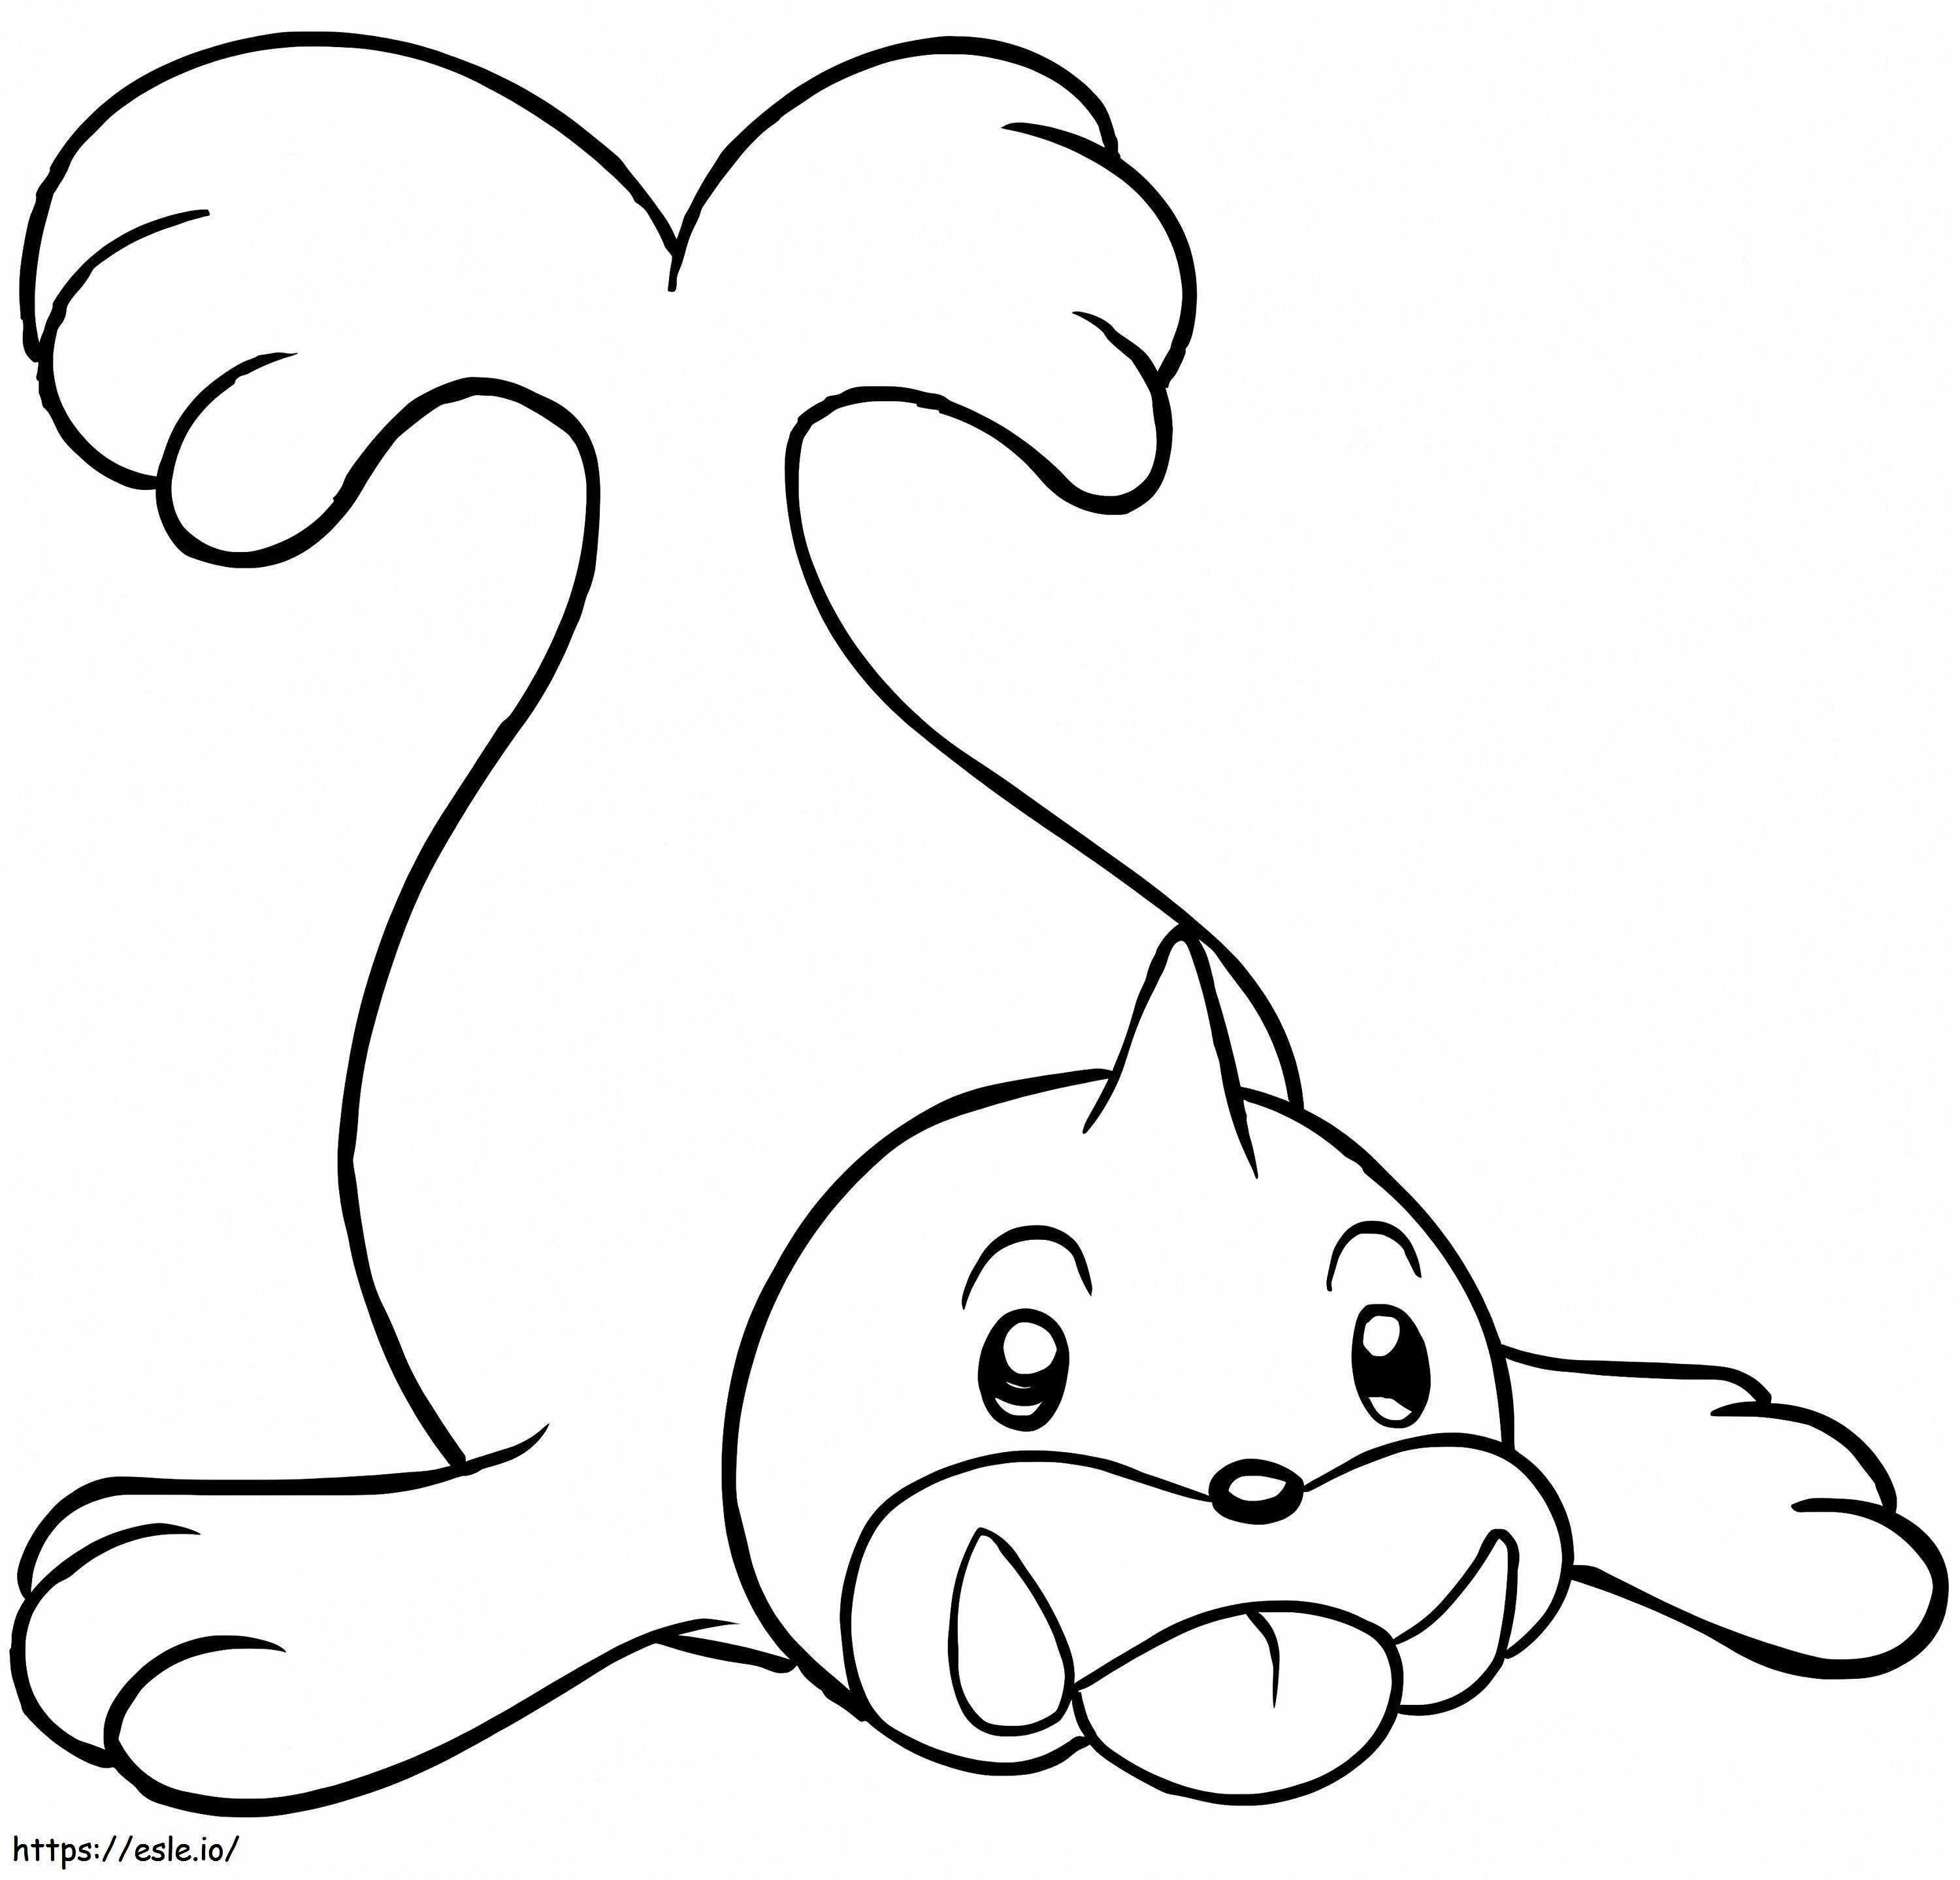 Gen 1 Pokemon Rope coloring page